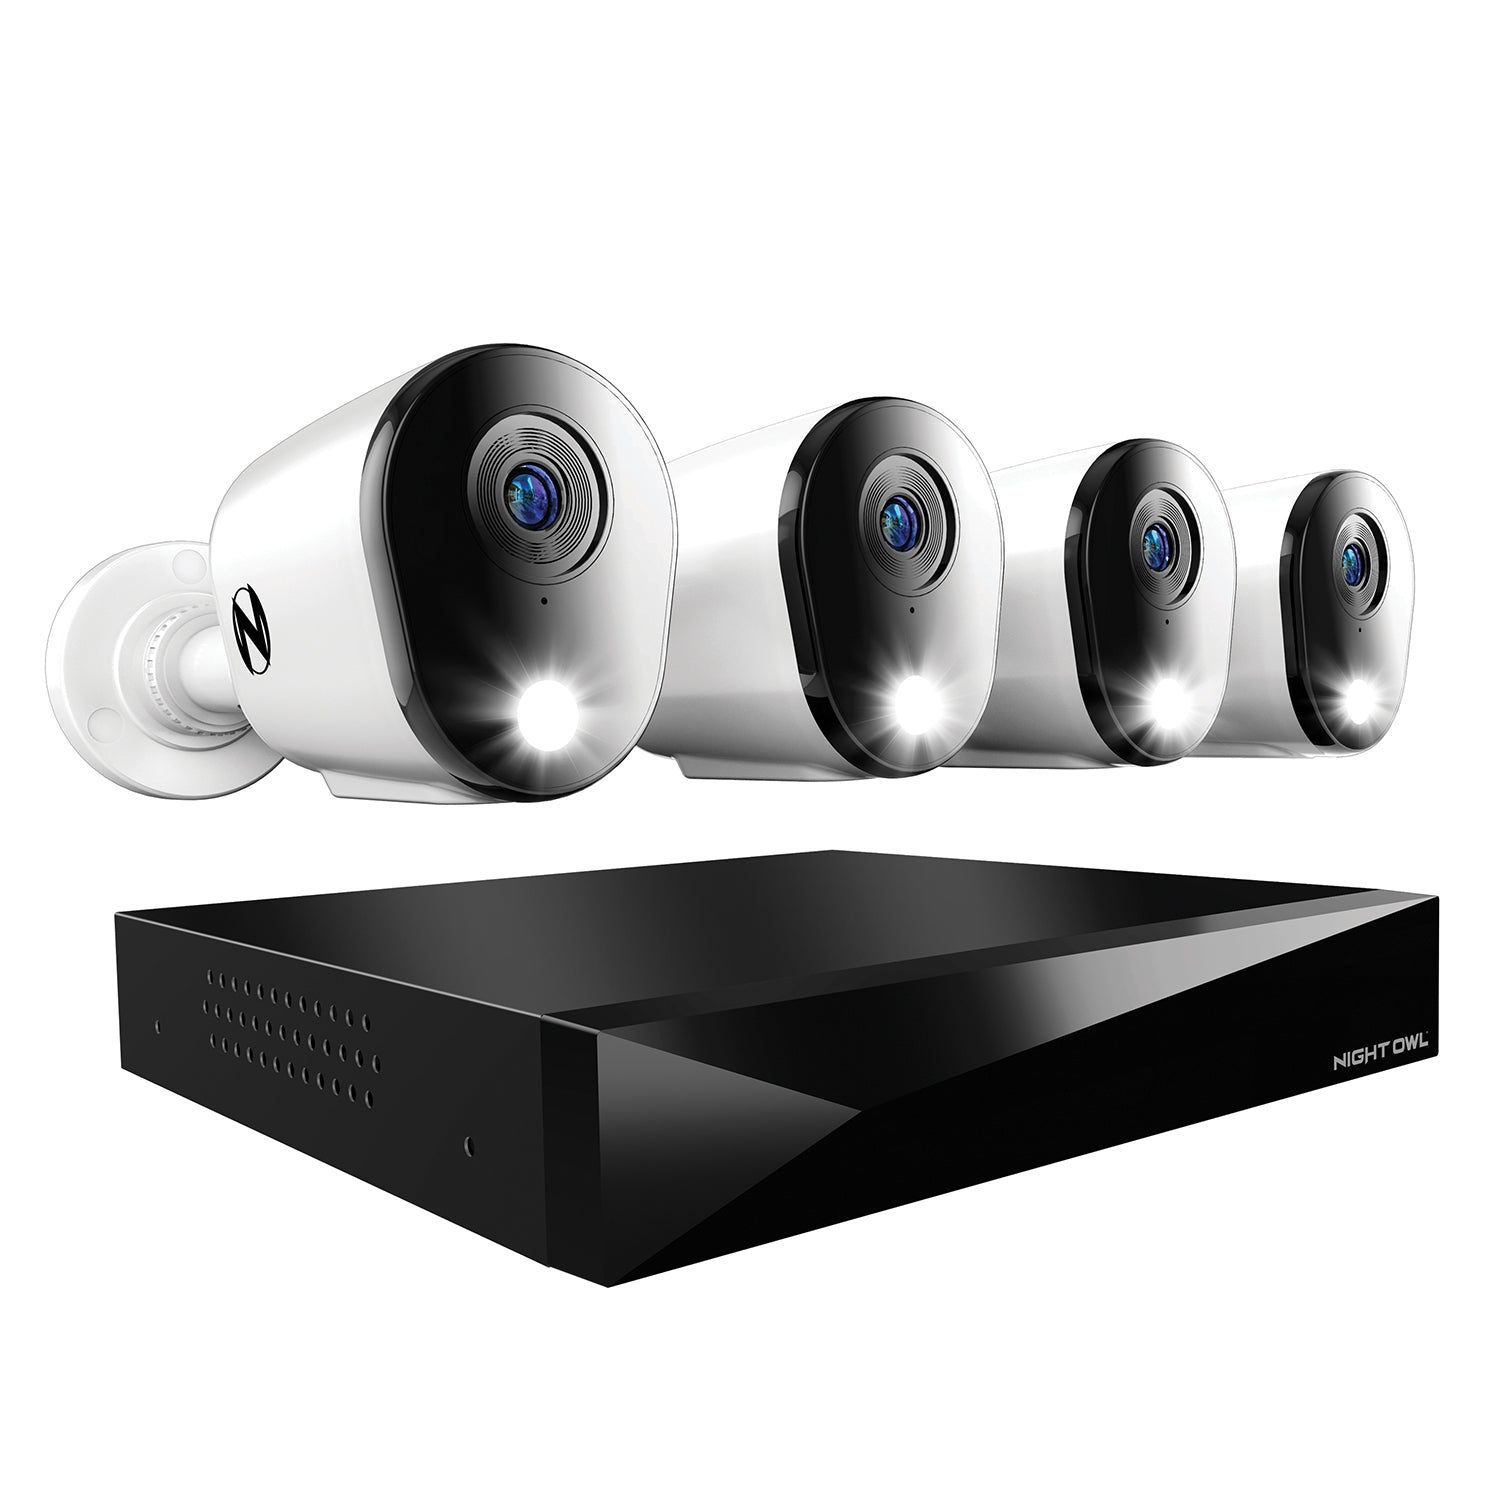 2-Way Audio 12 Channel DVR Security System with 1TB Hard Drive and W –  Night Owl SP, LLC